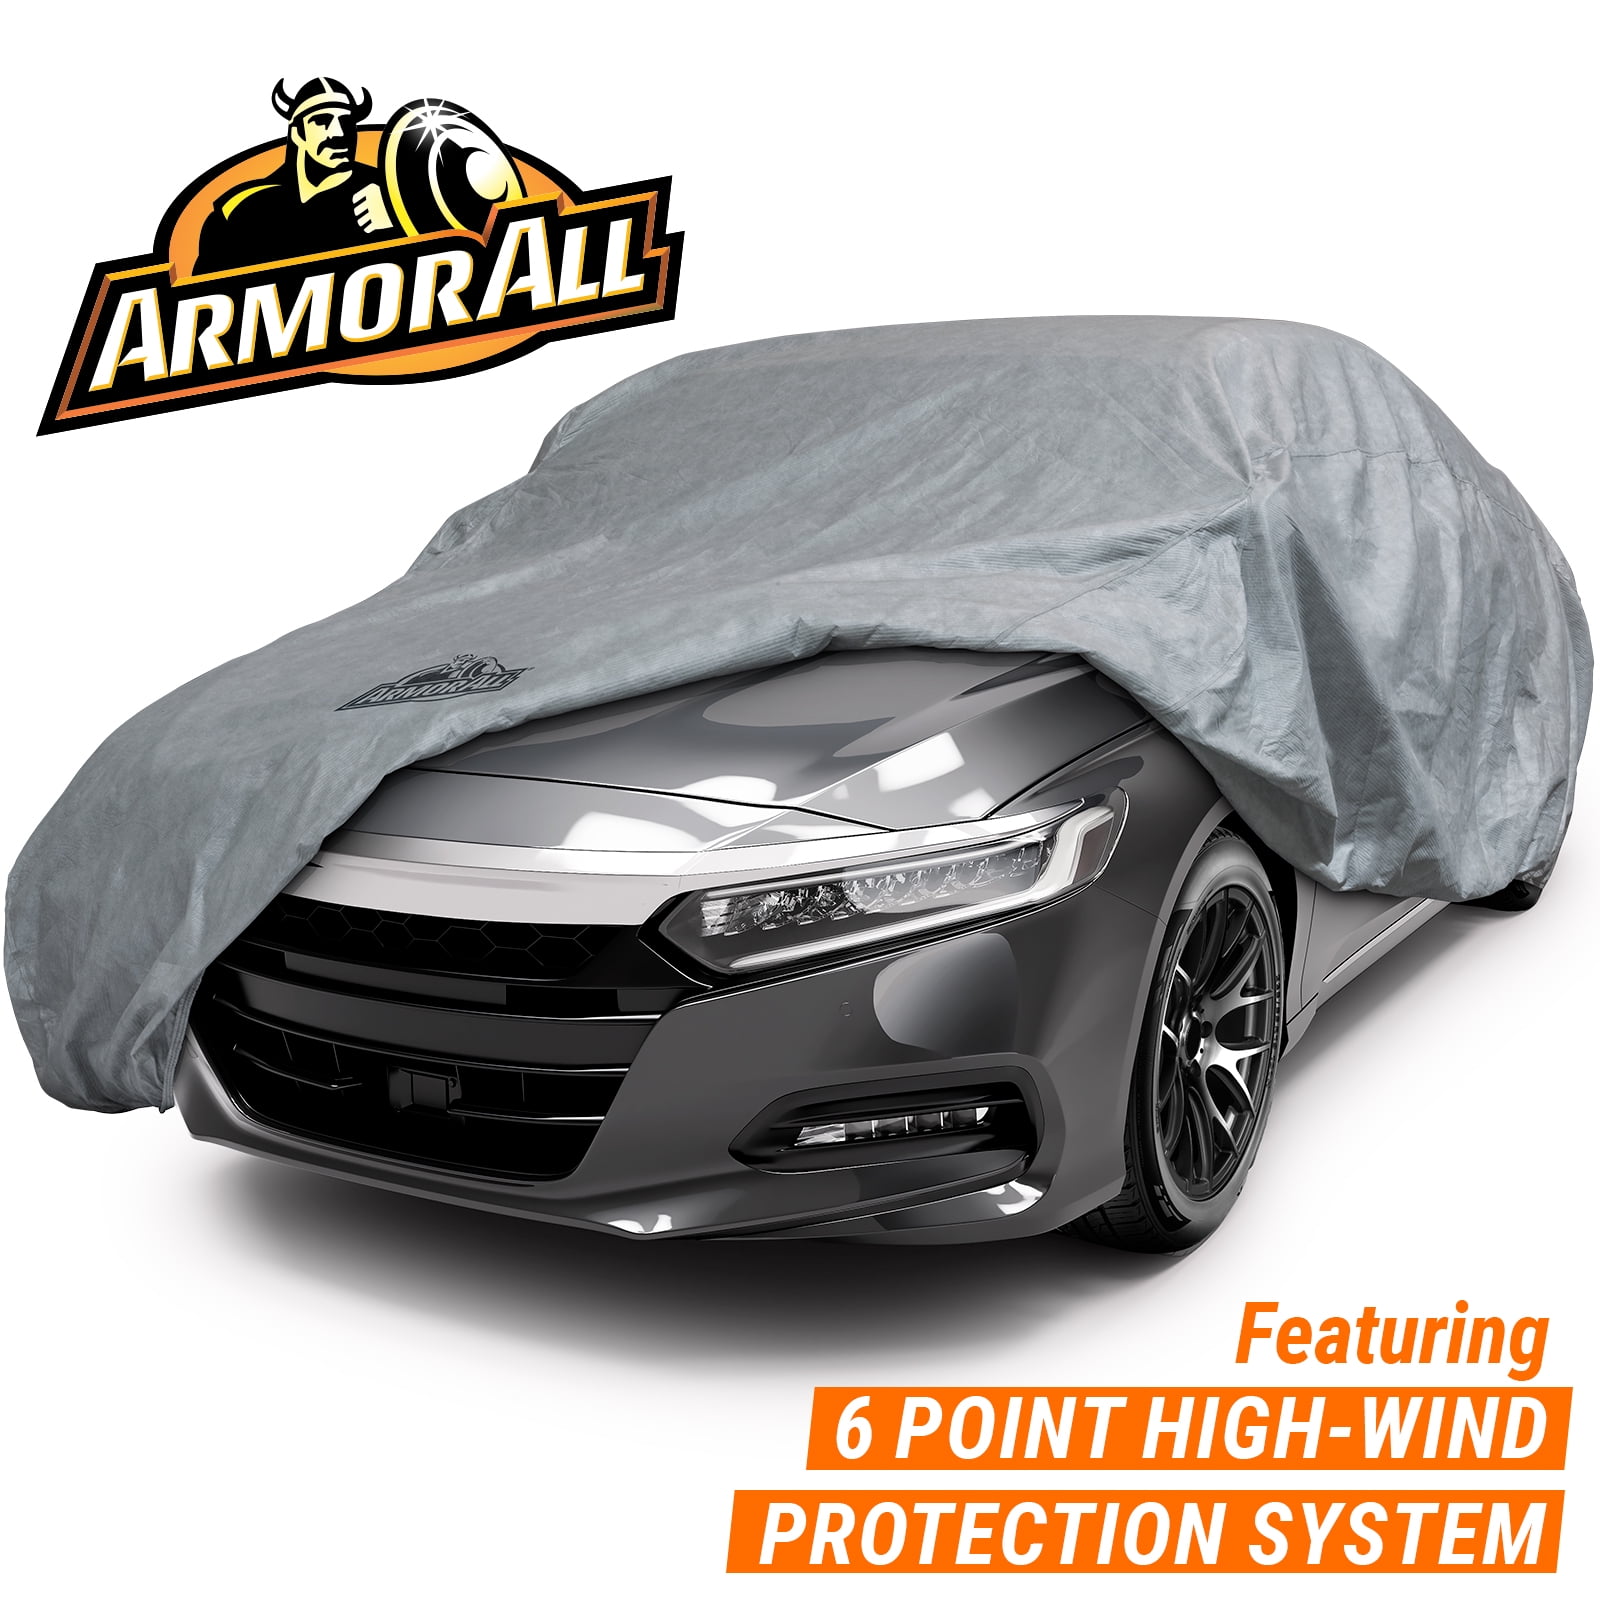 Armor All SUV Cover, Heavy Duty All Weather Protection, Fits SUVs Length up  to 186